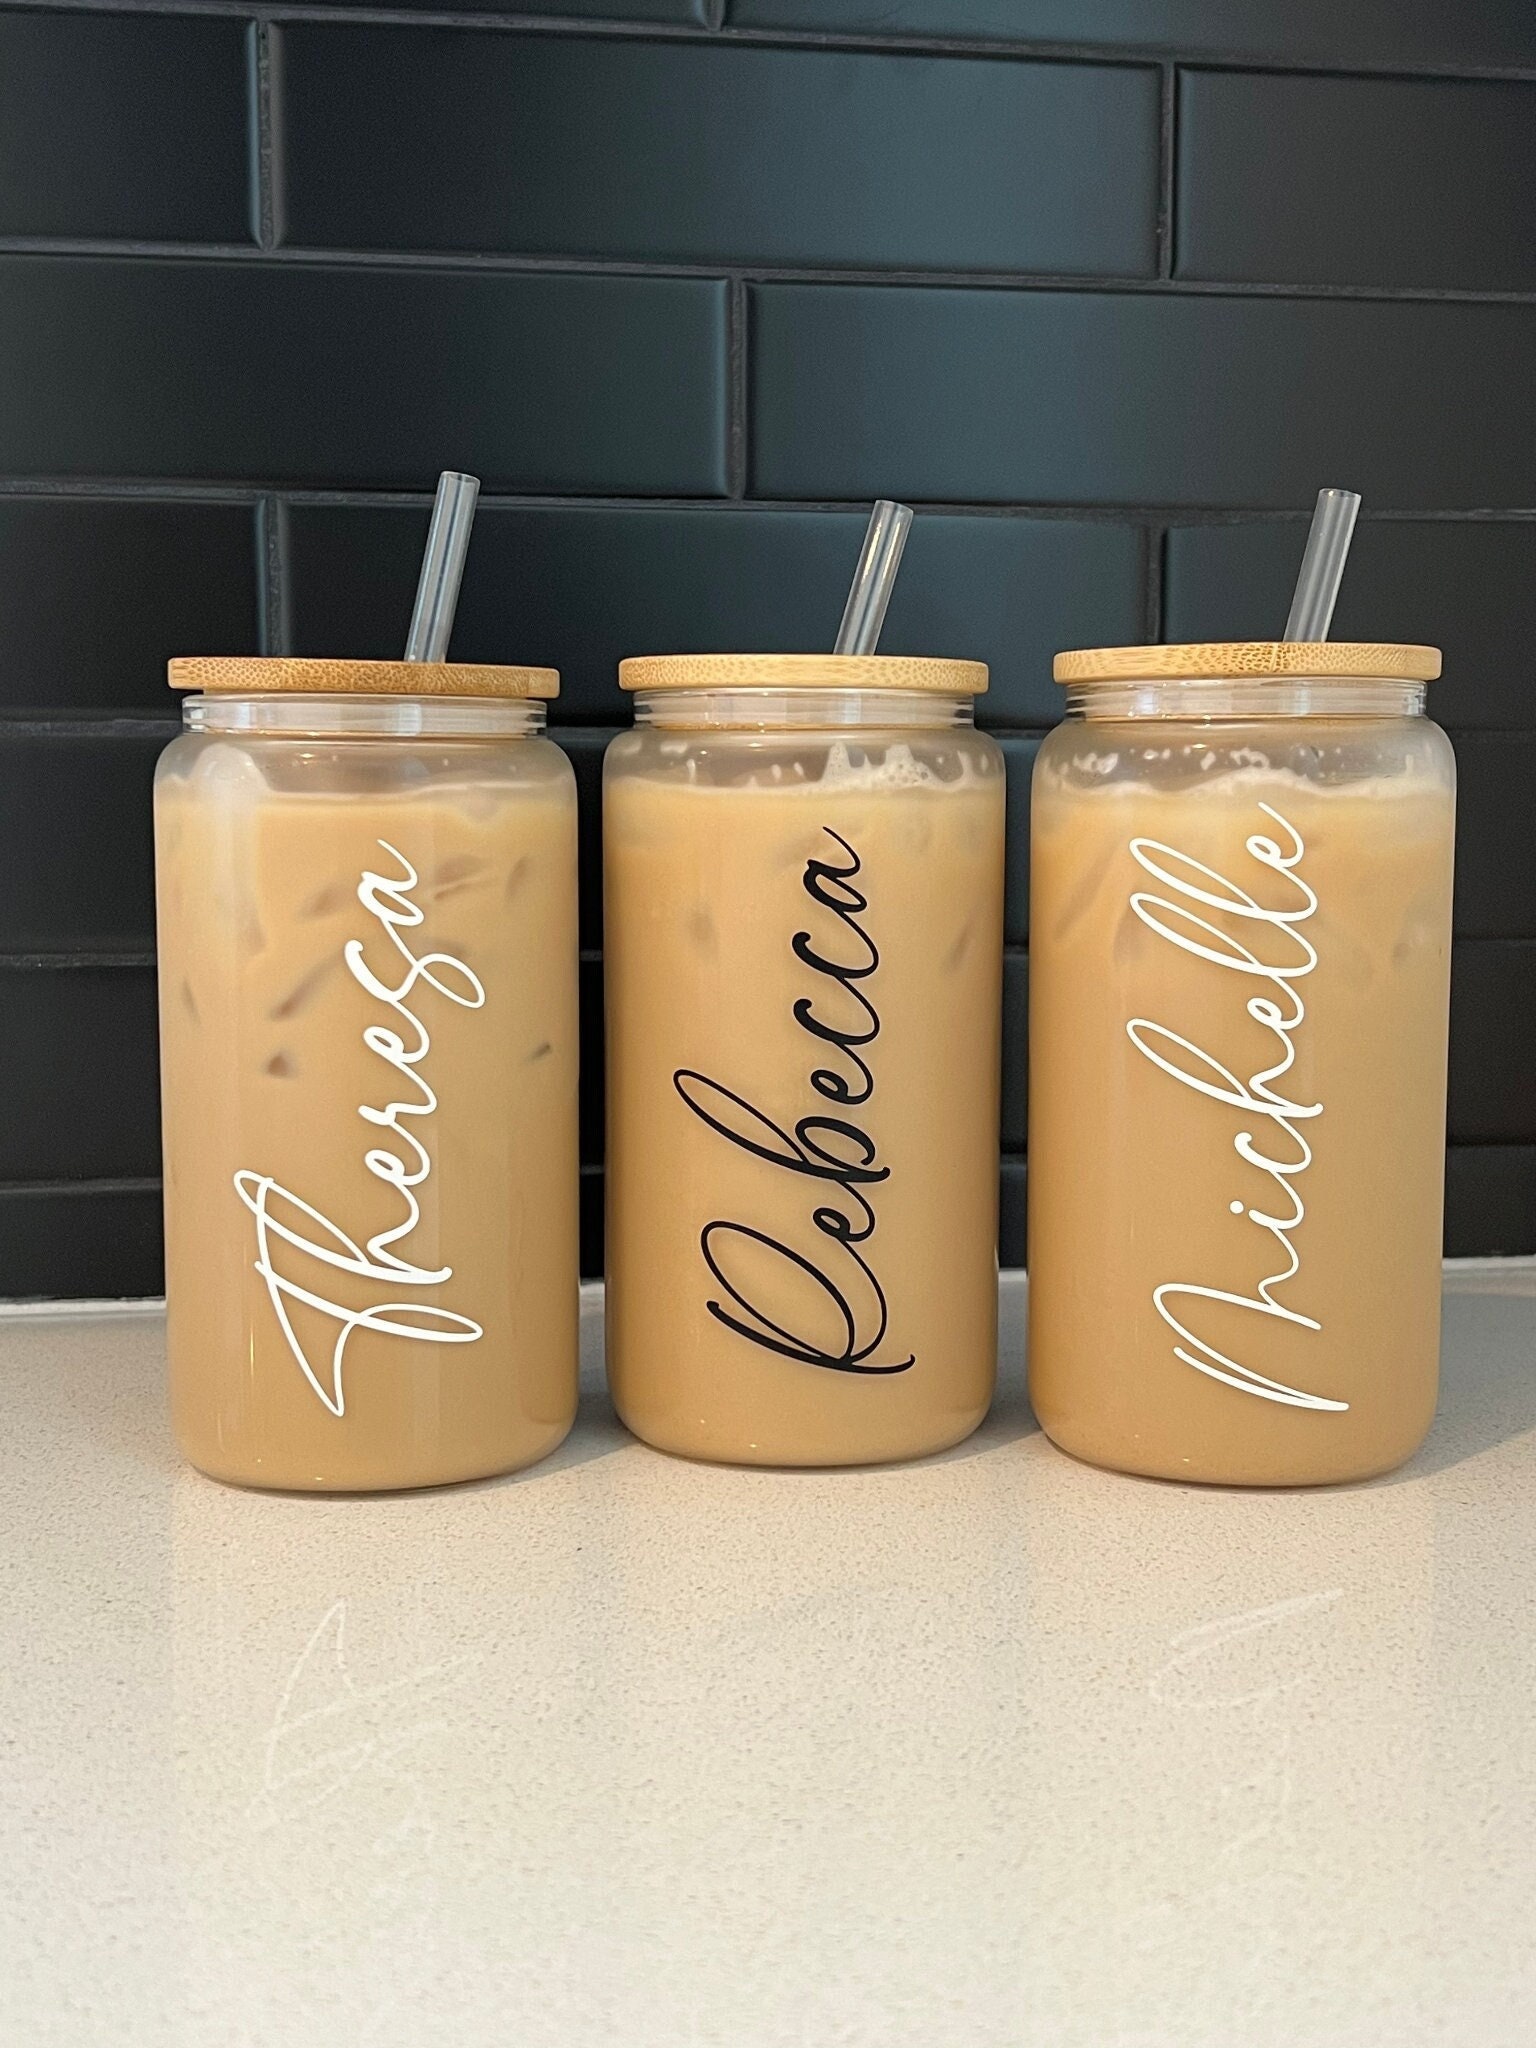 16 Oz Personalized Glass Cup With Bamboo Lid and Straw Custom Beer Can Mug,  Mason Jar, Bridesmaid Gift, Tumbler, Bachelorette Favor 